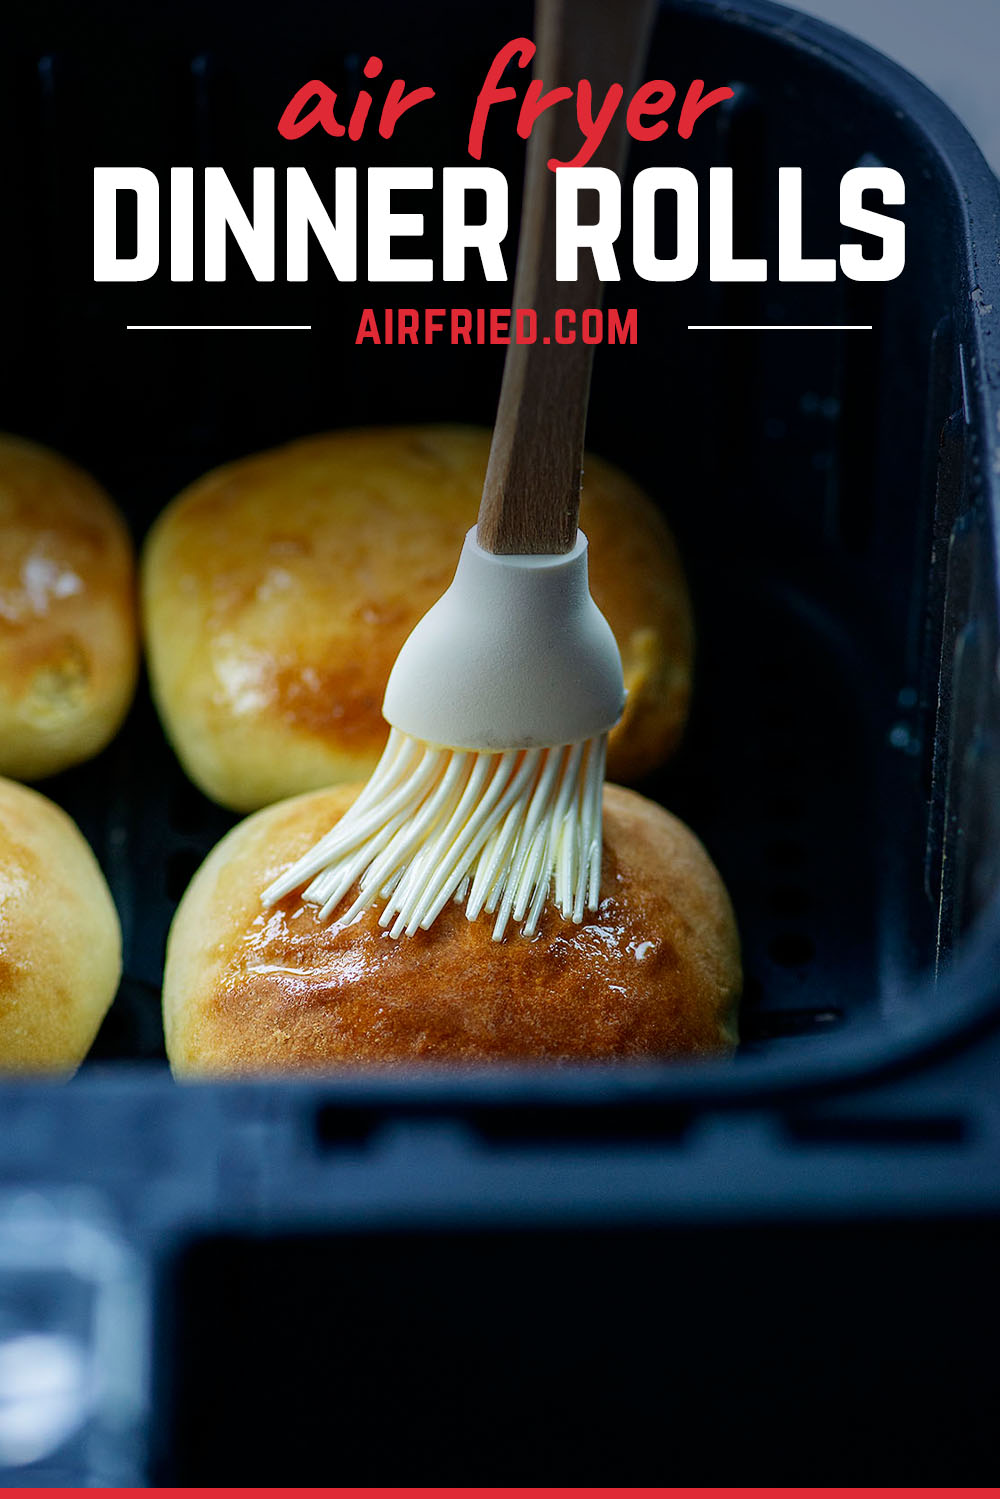 These air fryer dinner rolls came straight from the freezer and cook to perfection!